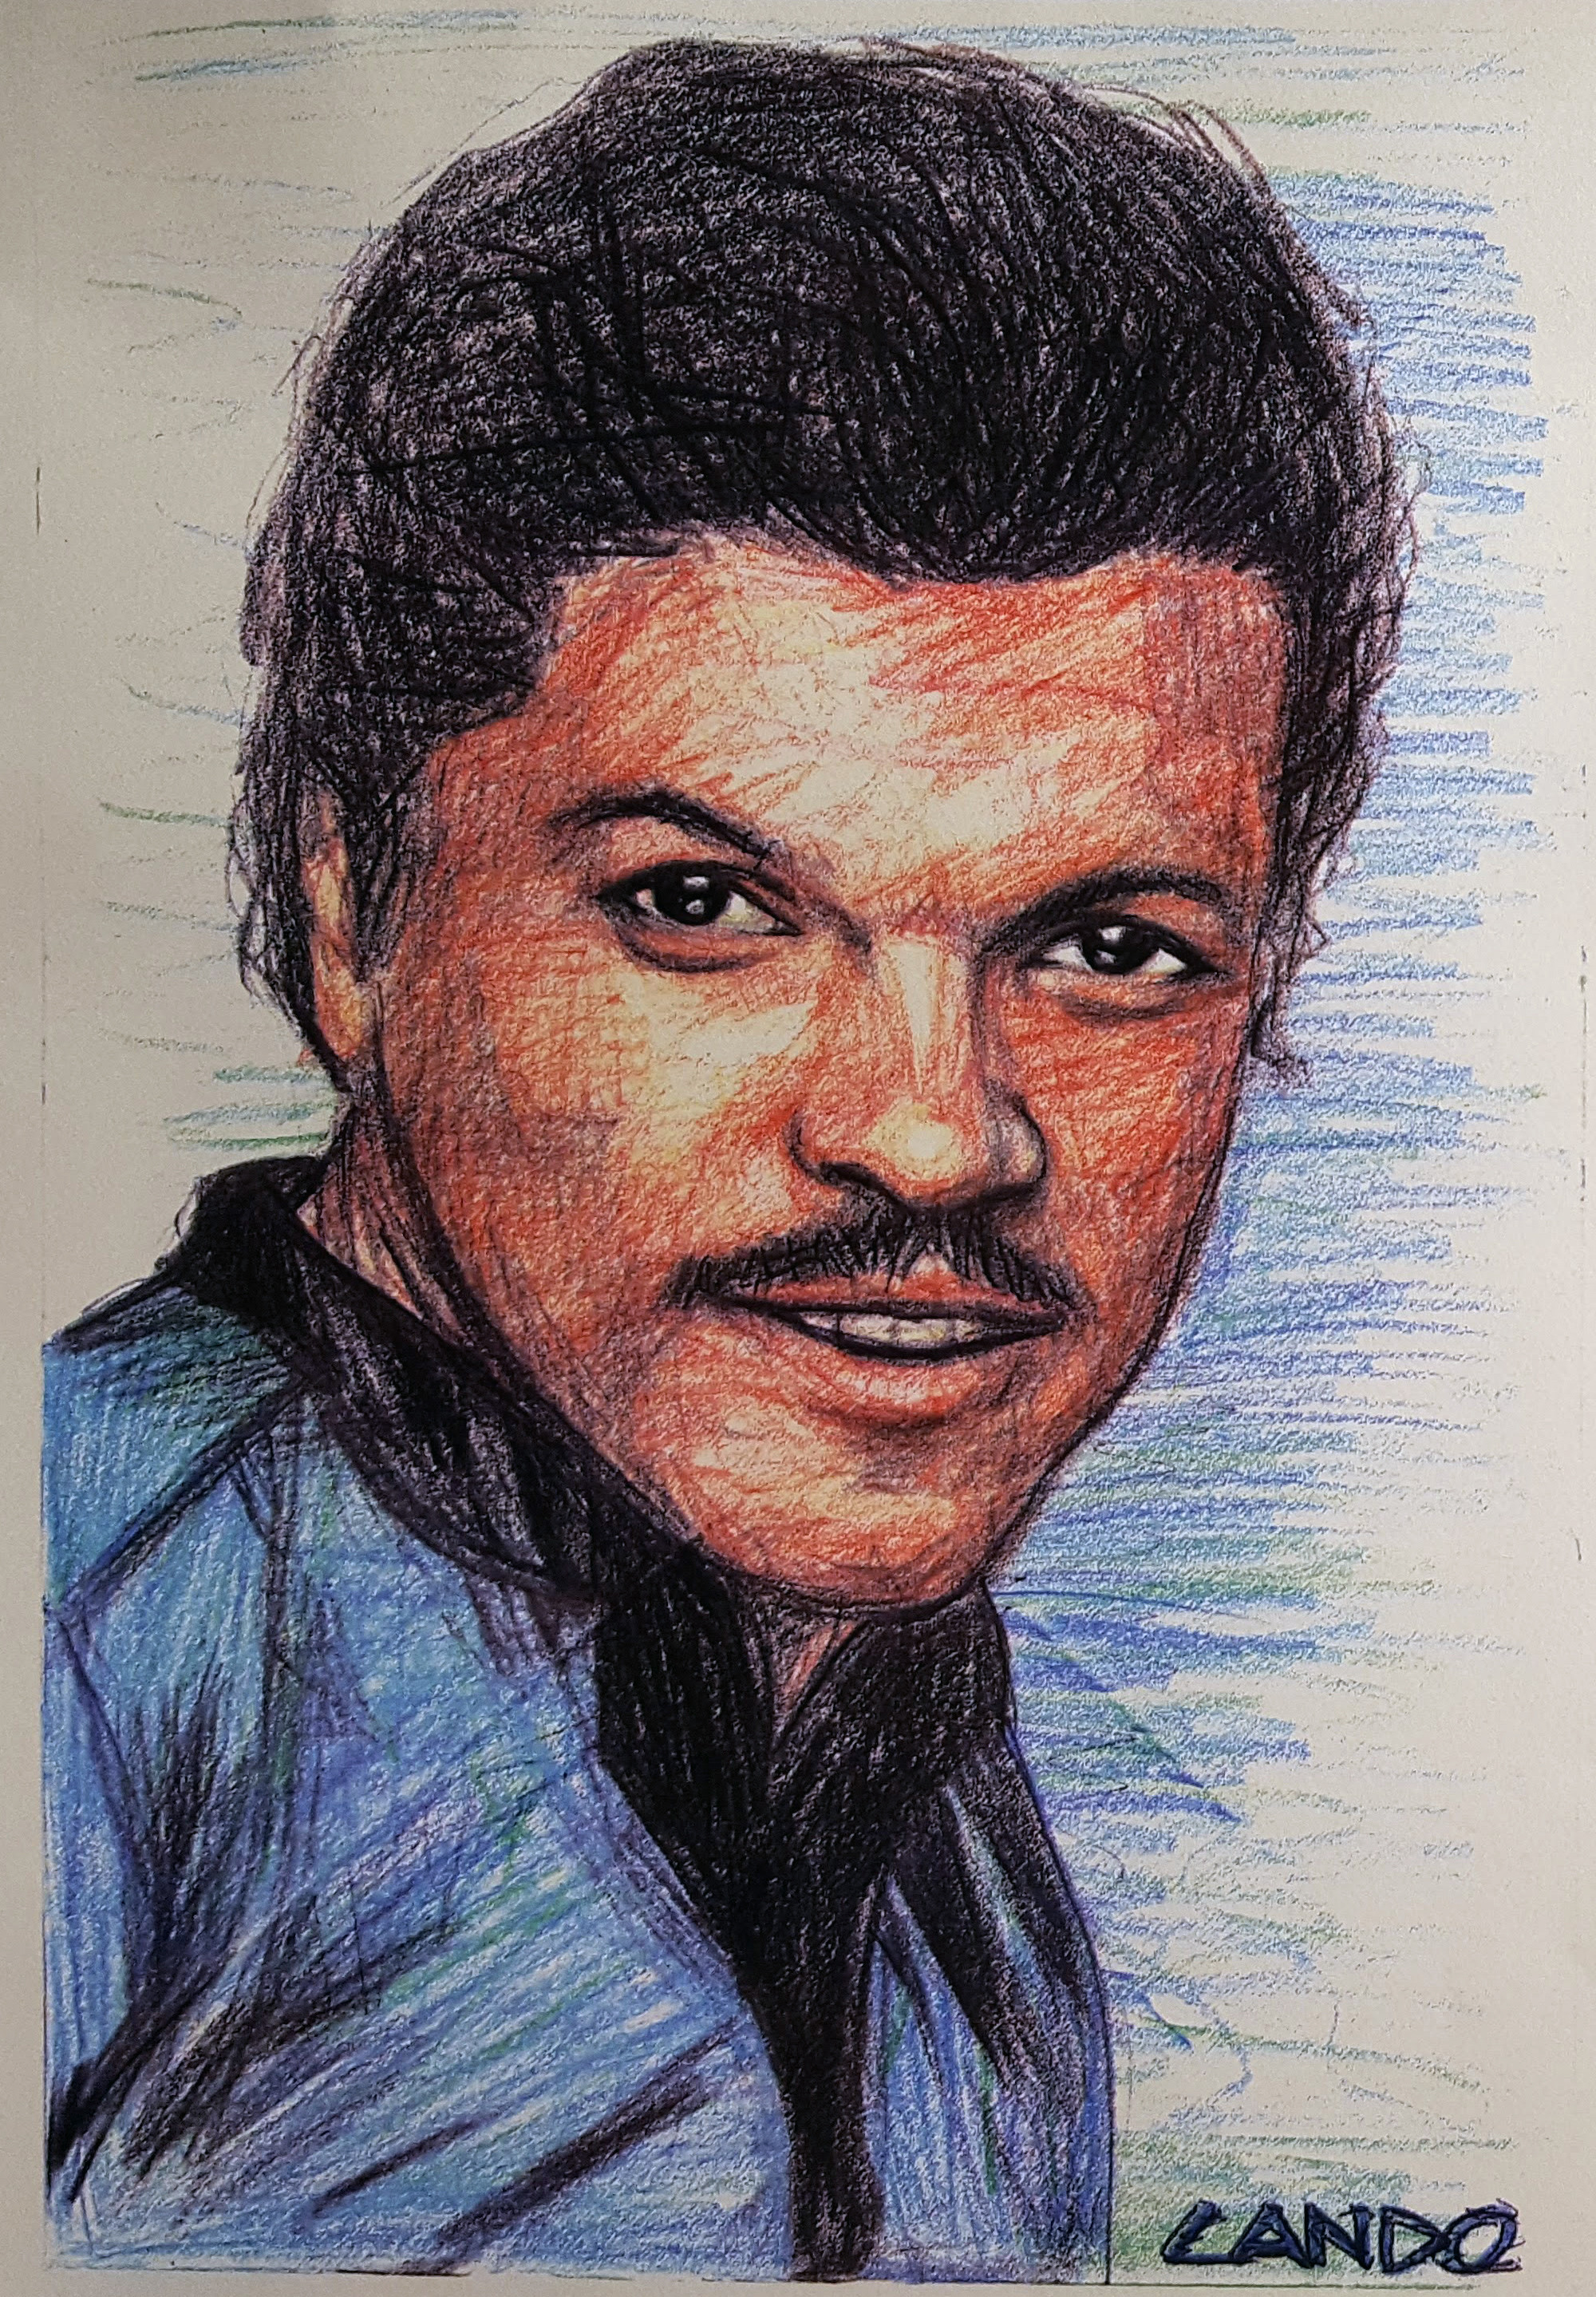 Another envelope sent to SWGC; portrait of Lando.